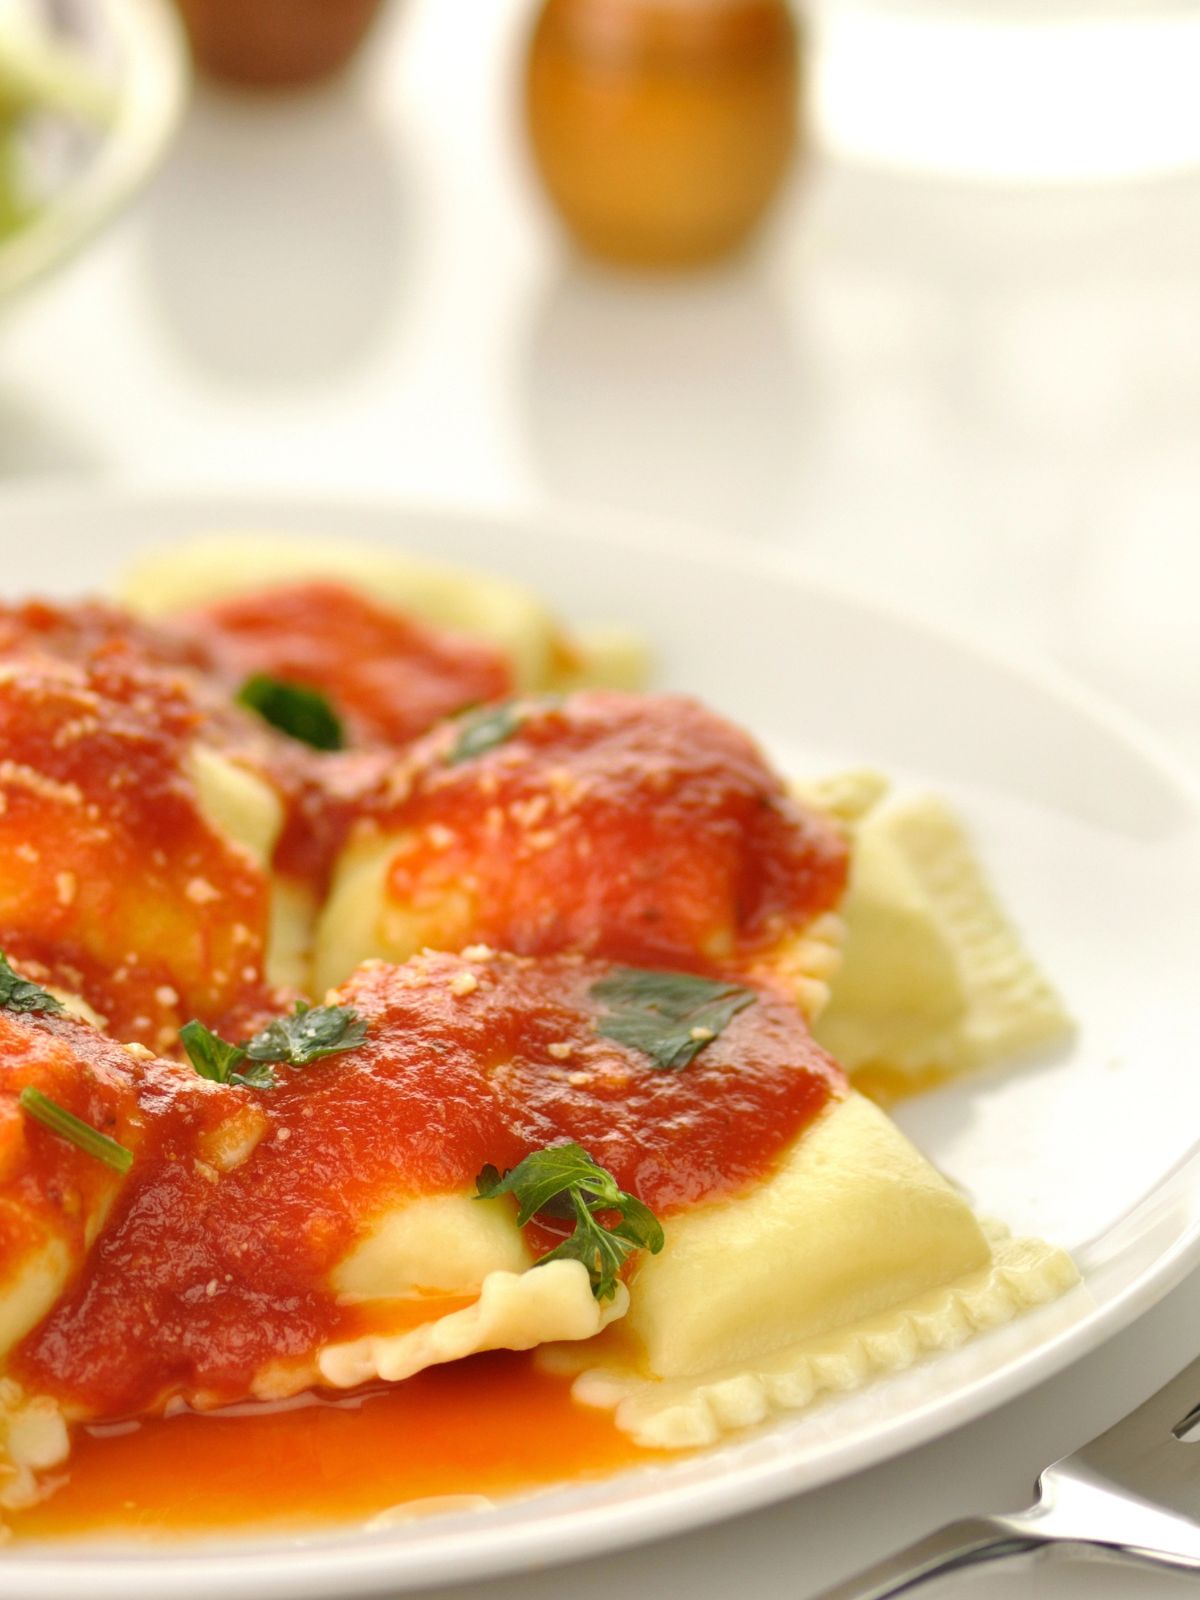 homemade square pasta on plate with tomato sauce and basil.